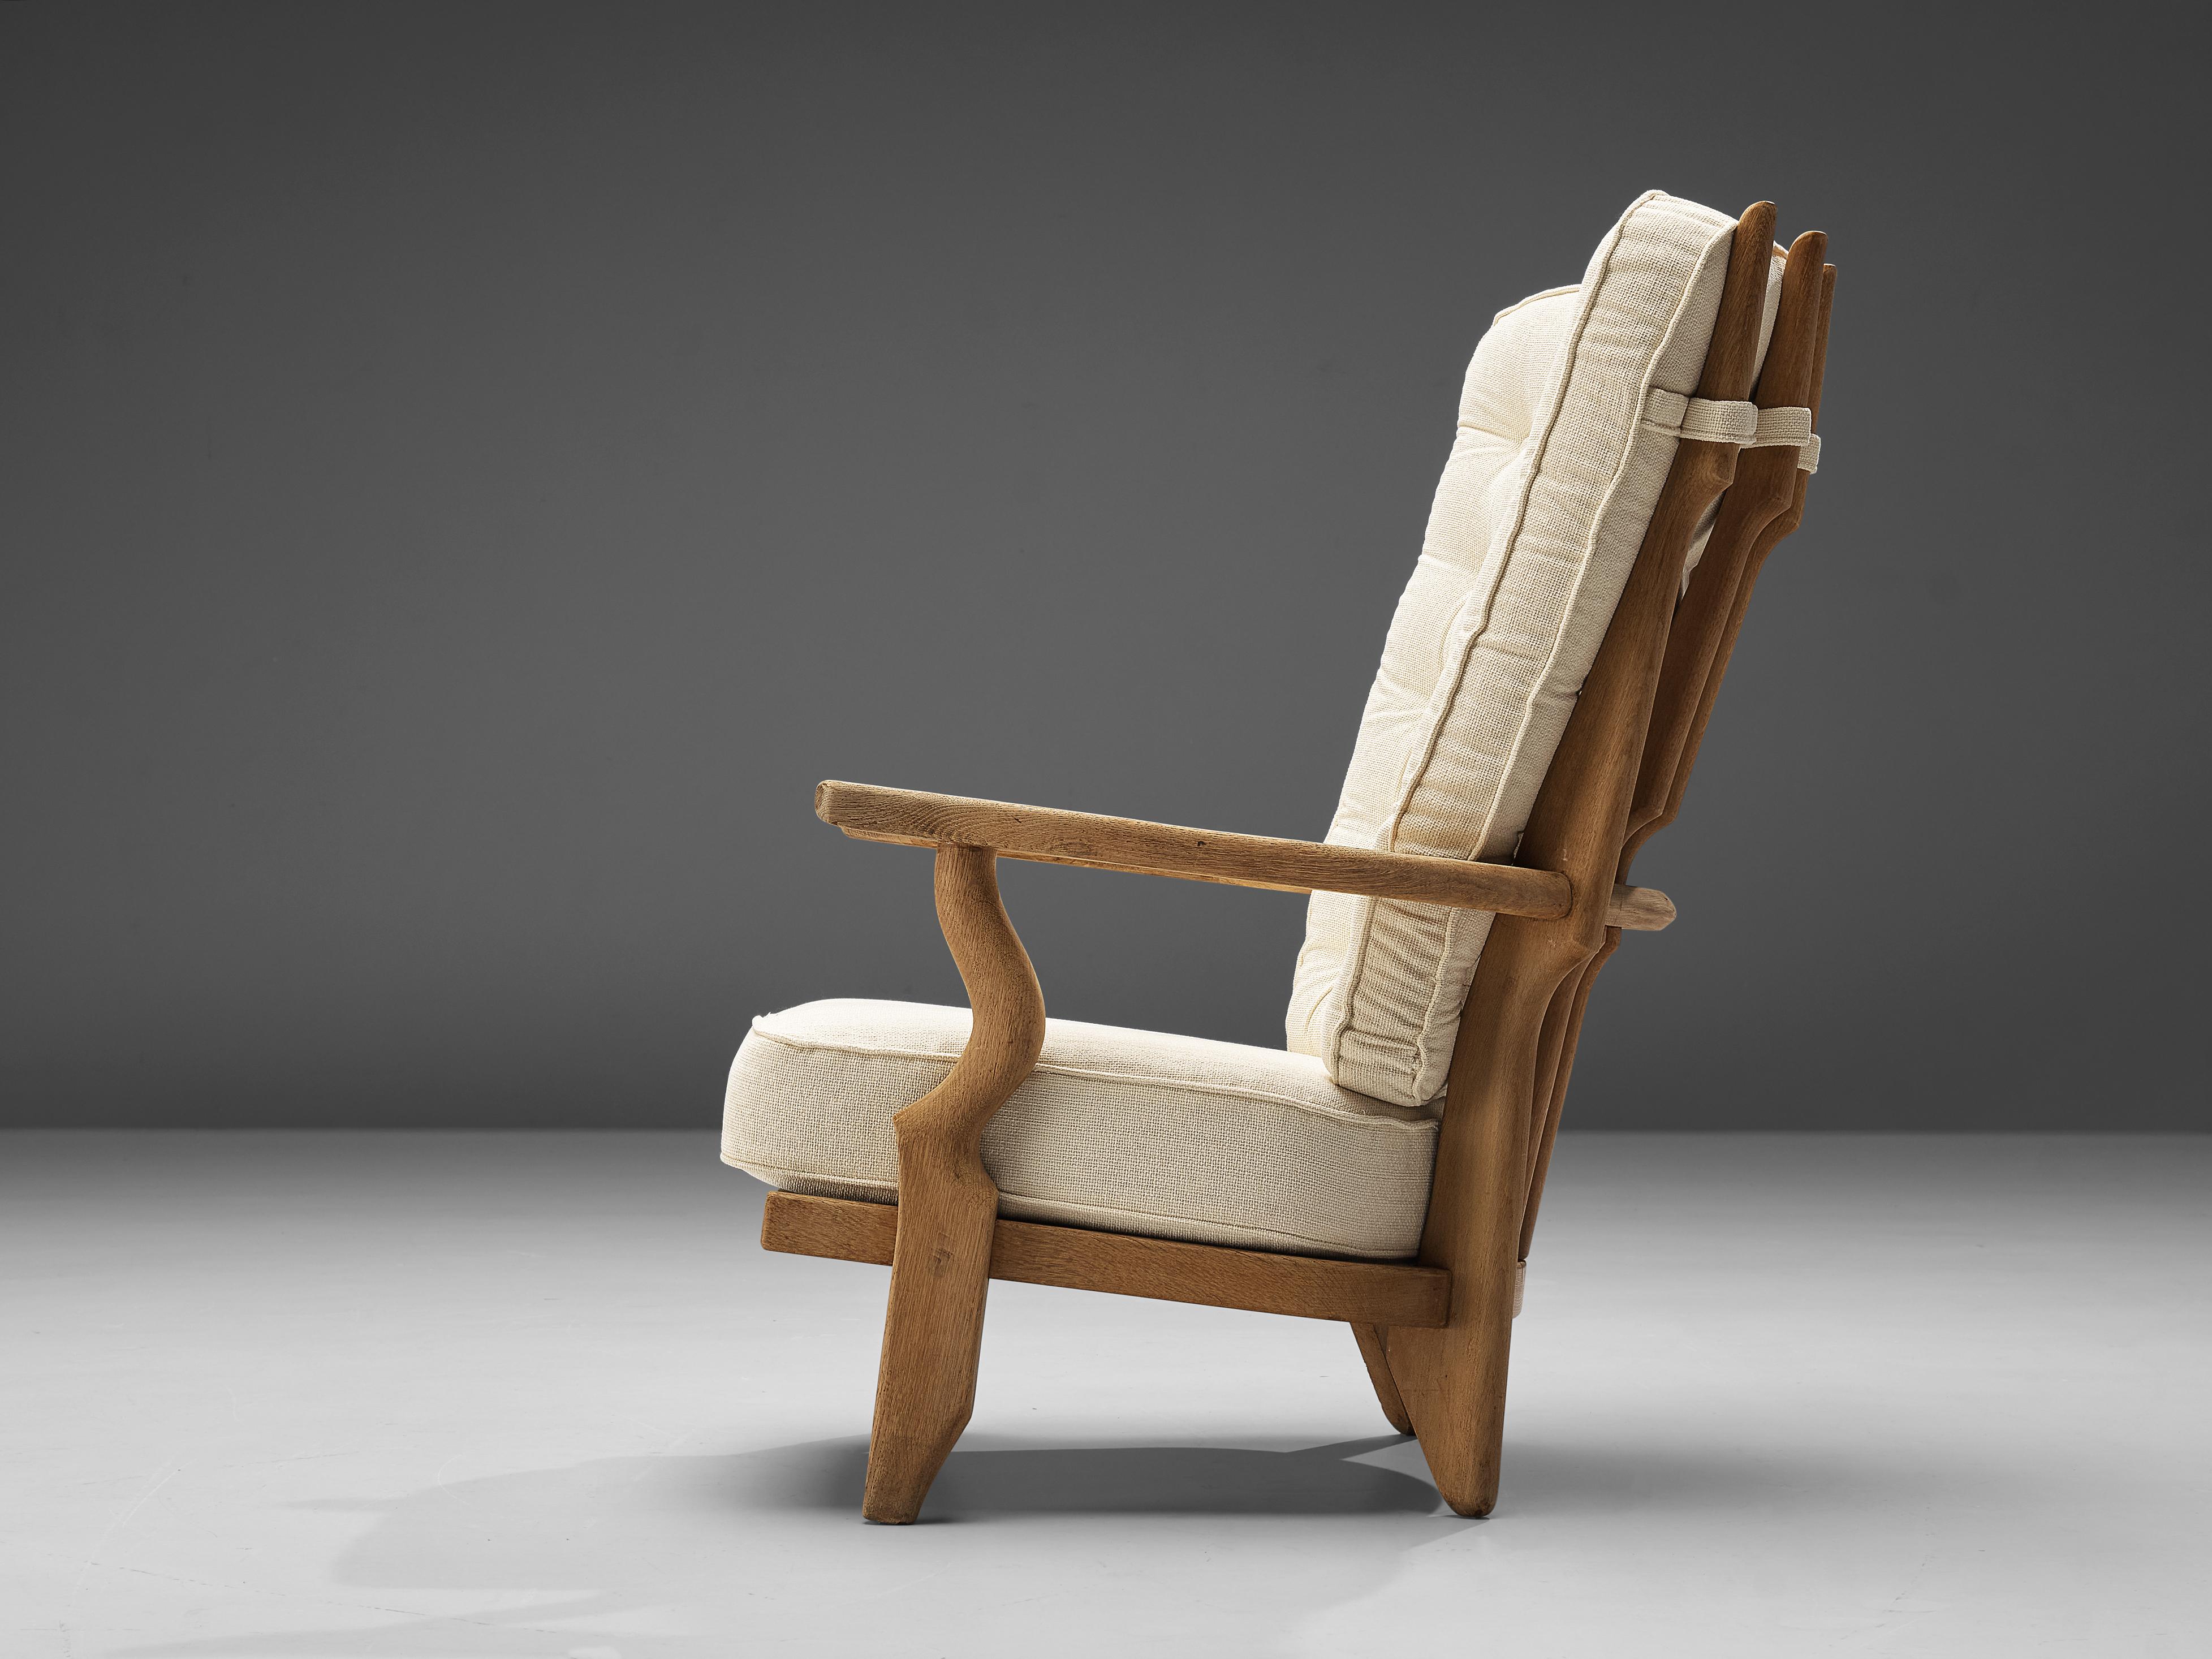 Guillerme & Chambron, 'Grand Repos' lounge chair oak, white fabric, oak, France, 1960s.

Guillerme & Chambron are known for their high quality solid oak furniture, from which this is another great example. This chair has an interesting, sculptural